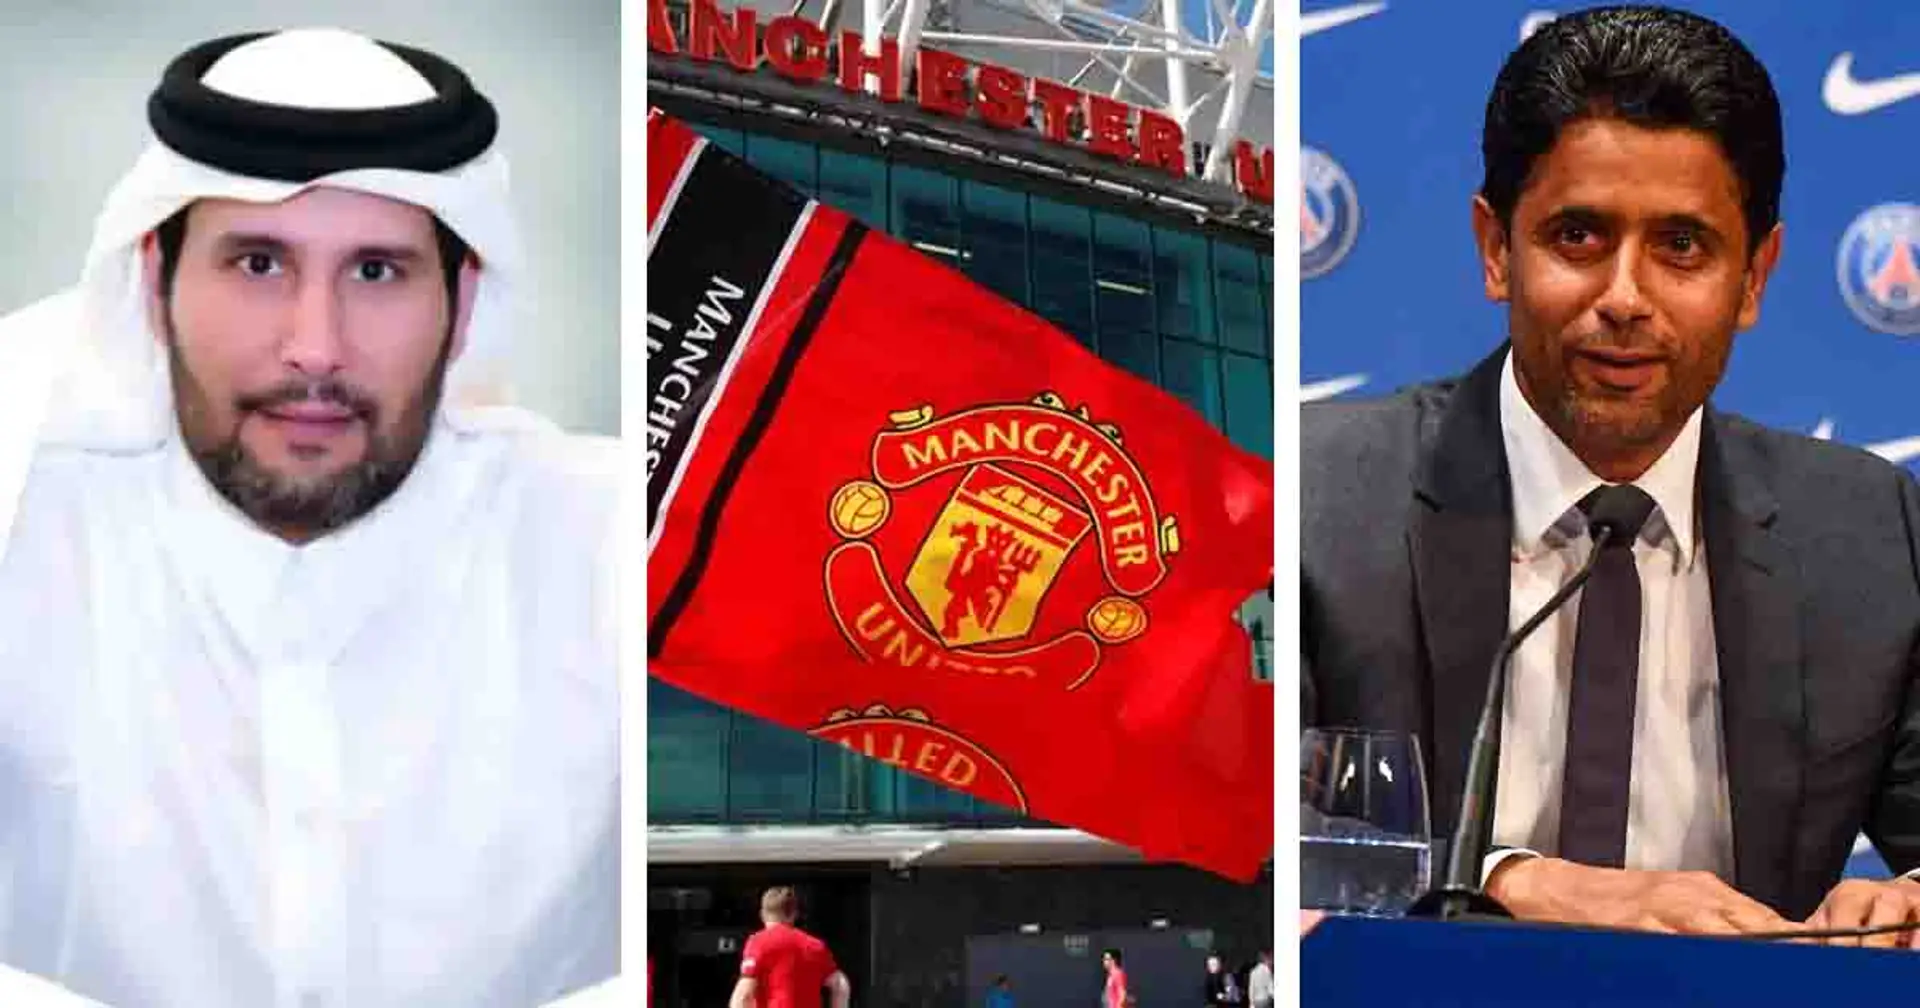 Qatar planning to put Man United on top of Europe’s 'most powerful multi-club network' - explained